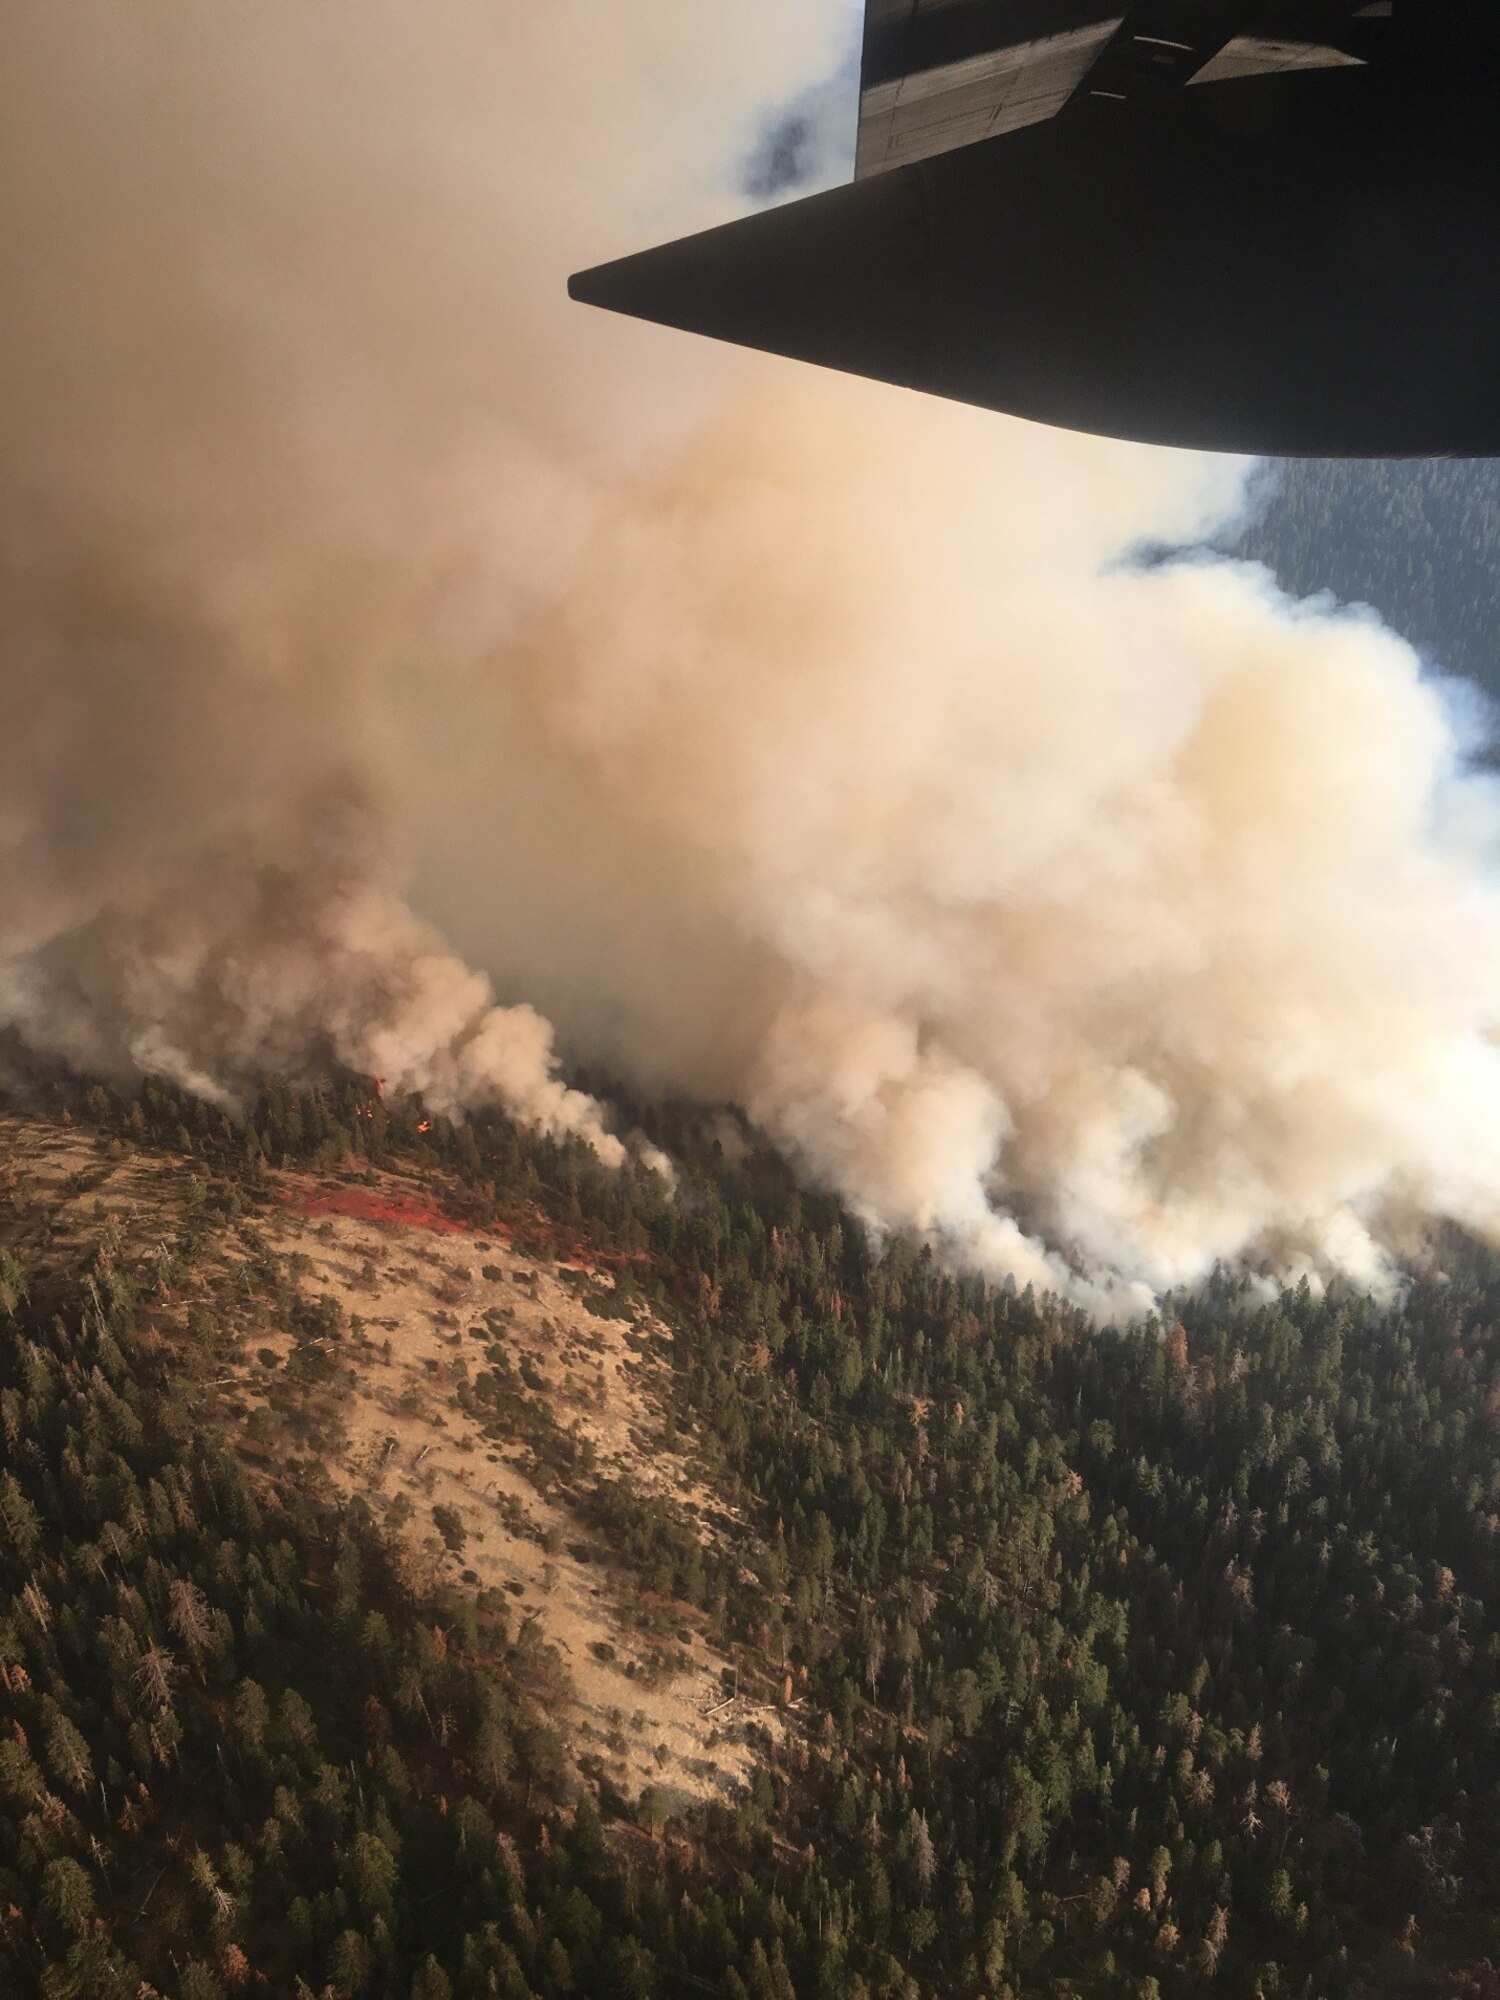 Smoke and the start of a fire retardant containment line dropped by a Modular Airborne Fire Fighting System-equipped C-130 Hercules aircraft near California’s South Fork Fire, south of Yosemite National Park are visible, Aug. 14, 2017. MAFFS-equipped C-130s and aircrews from the Air Force Reserve are providing support to the U.S. Forest Service fire suppression efforts from Air Tanker Base Fresno, California. (U.S. Air Force photo/Master Sgt. Thomas Freeman)